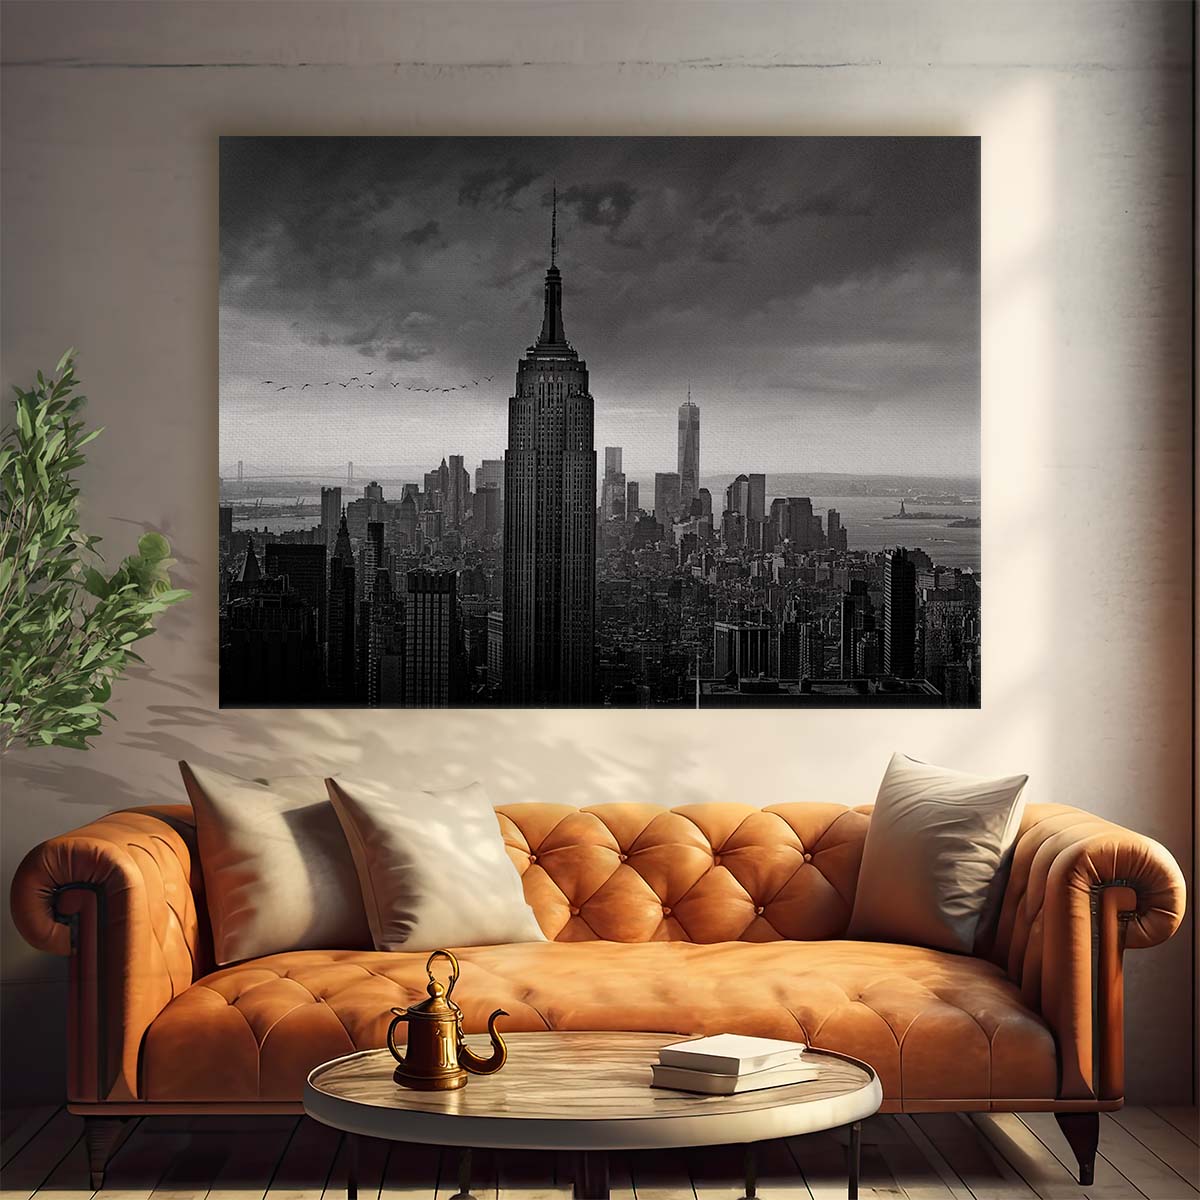 Iconic New York Cityscape Monochrome Skyline Wall Art by Luxuriance Designs. Made in USA.